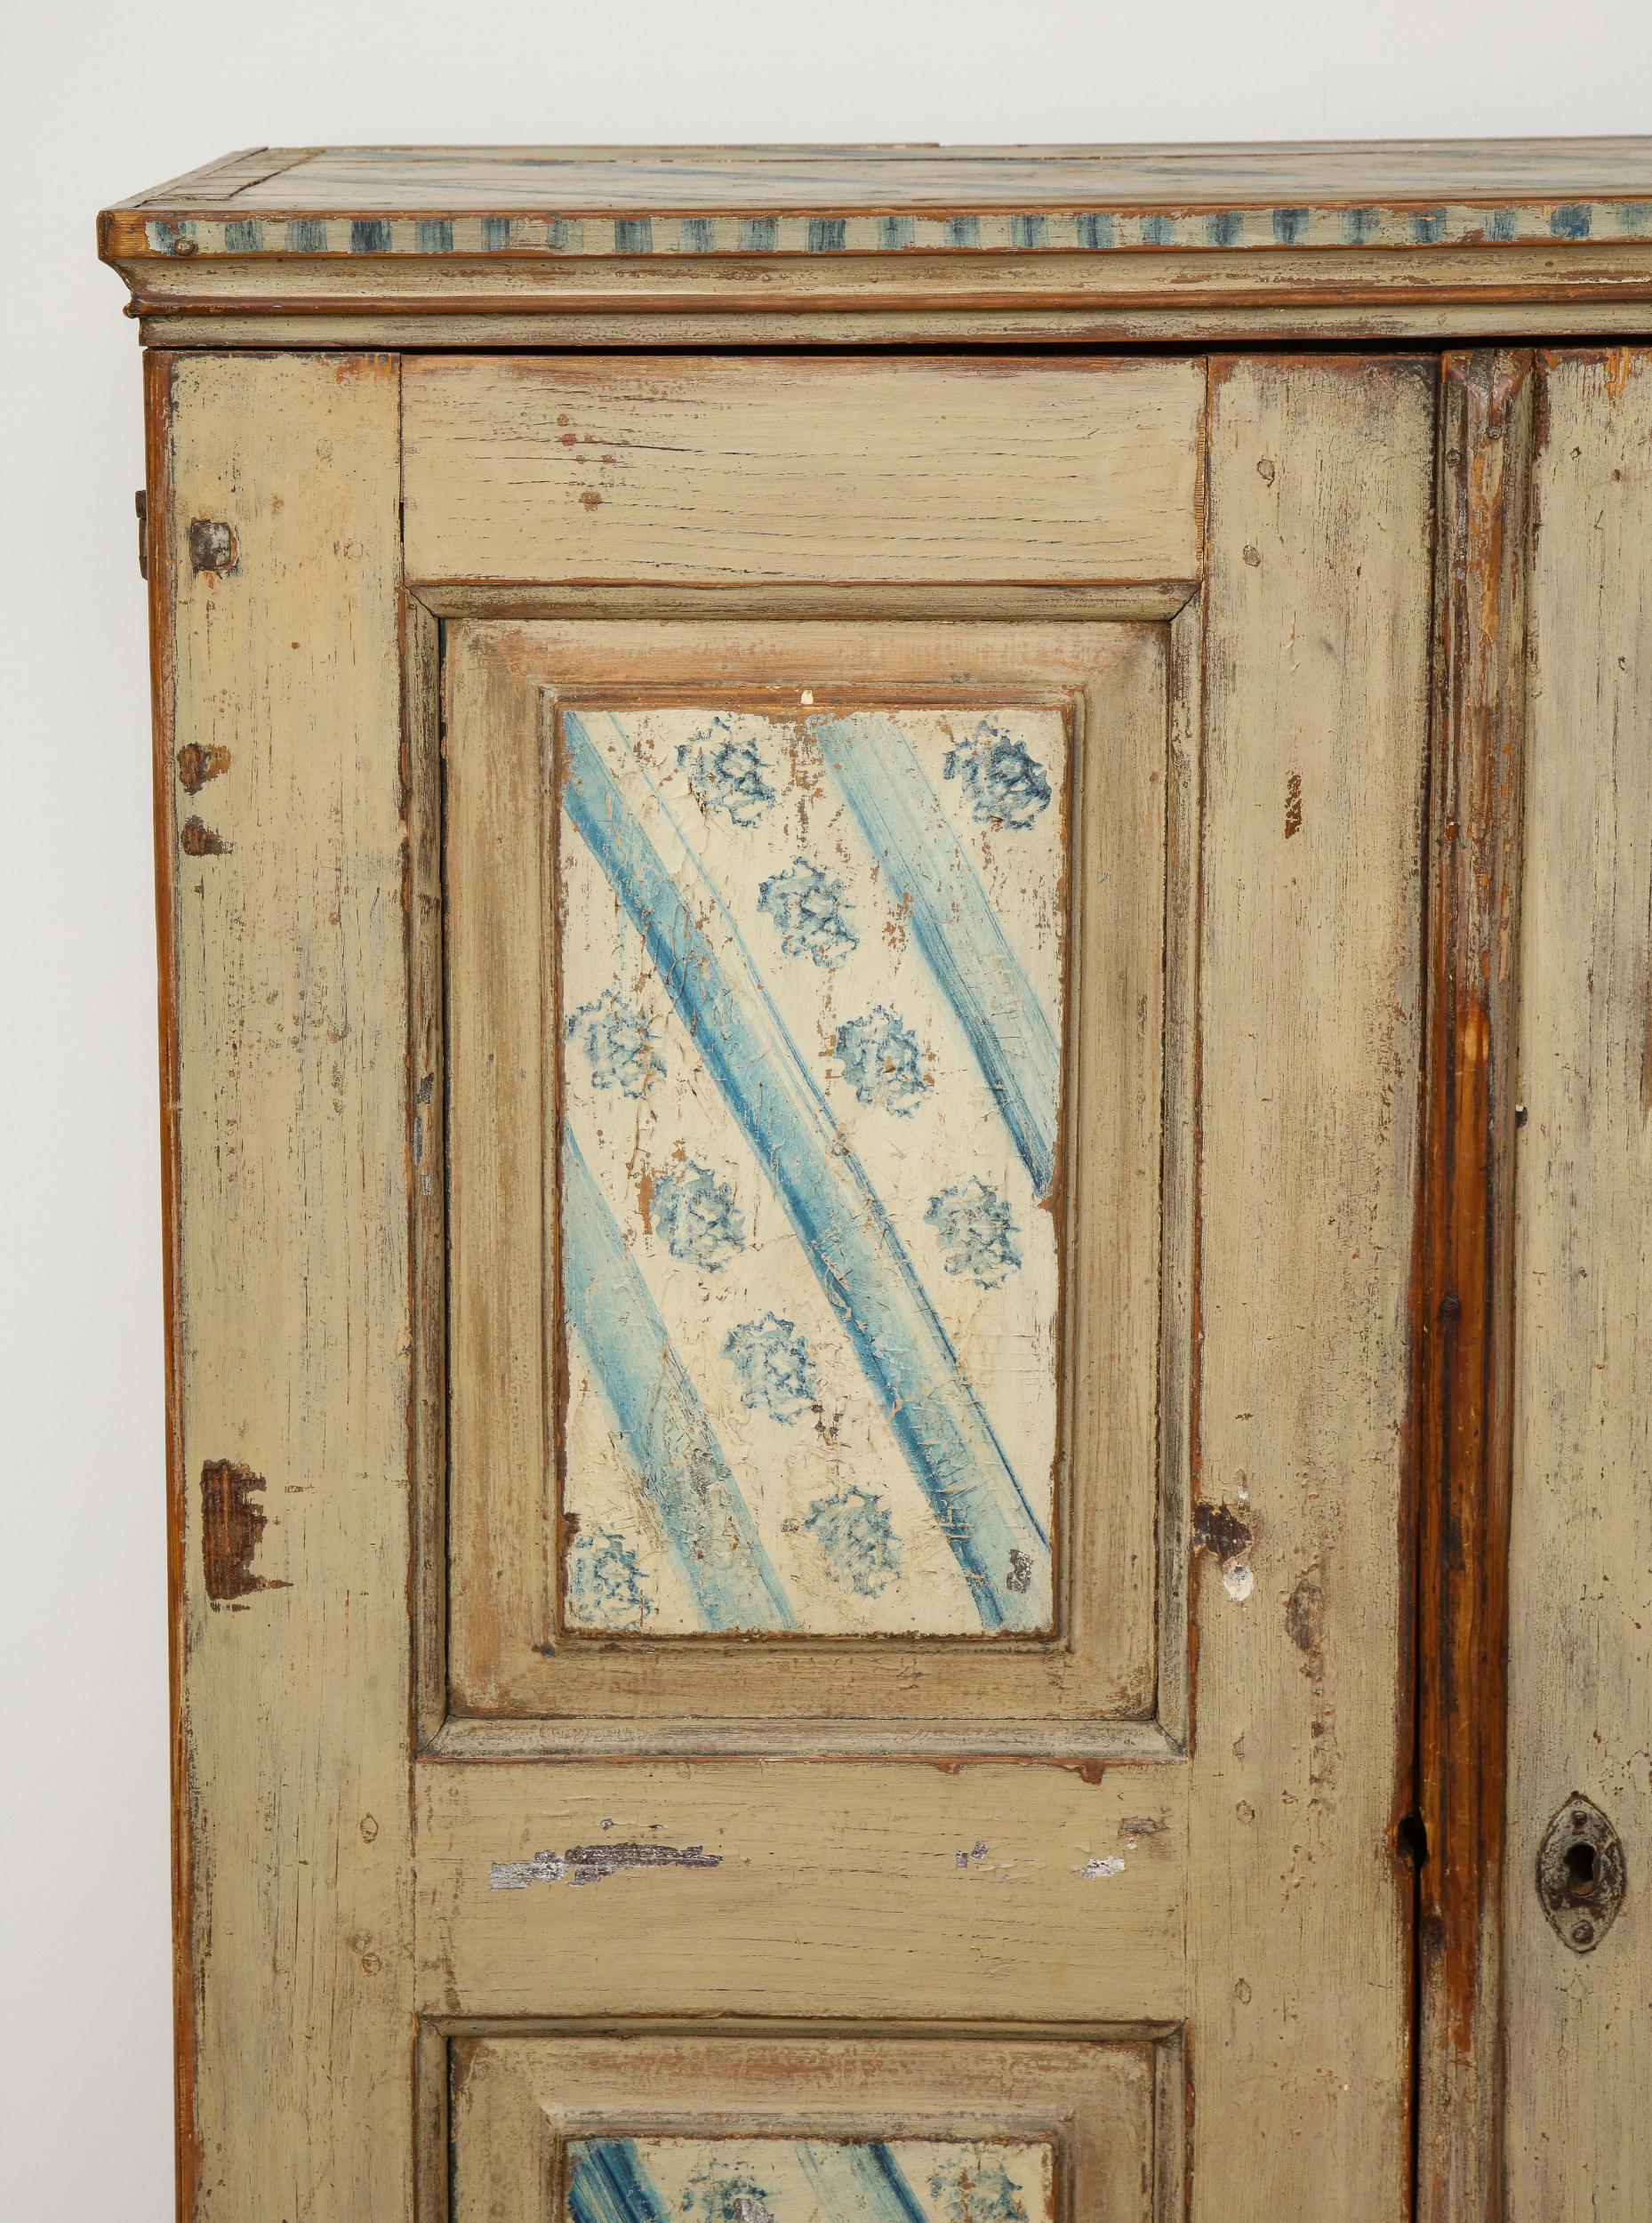 A late 18th-century Swedish Folk Art pinewood cabinet. The four-door panels have been sponge-painted and bookmatched, done in a blue and white stripe and floral pattern. The top of the cabinet is finished in the same painted pattern. A wonderful